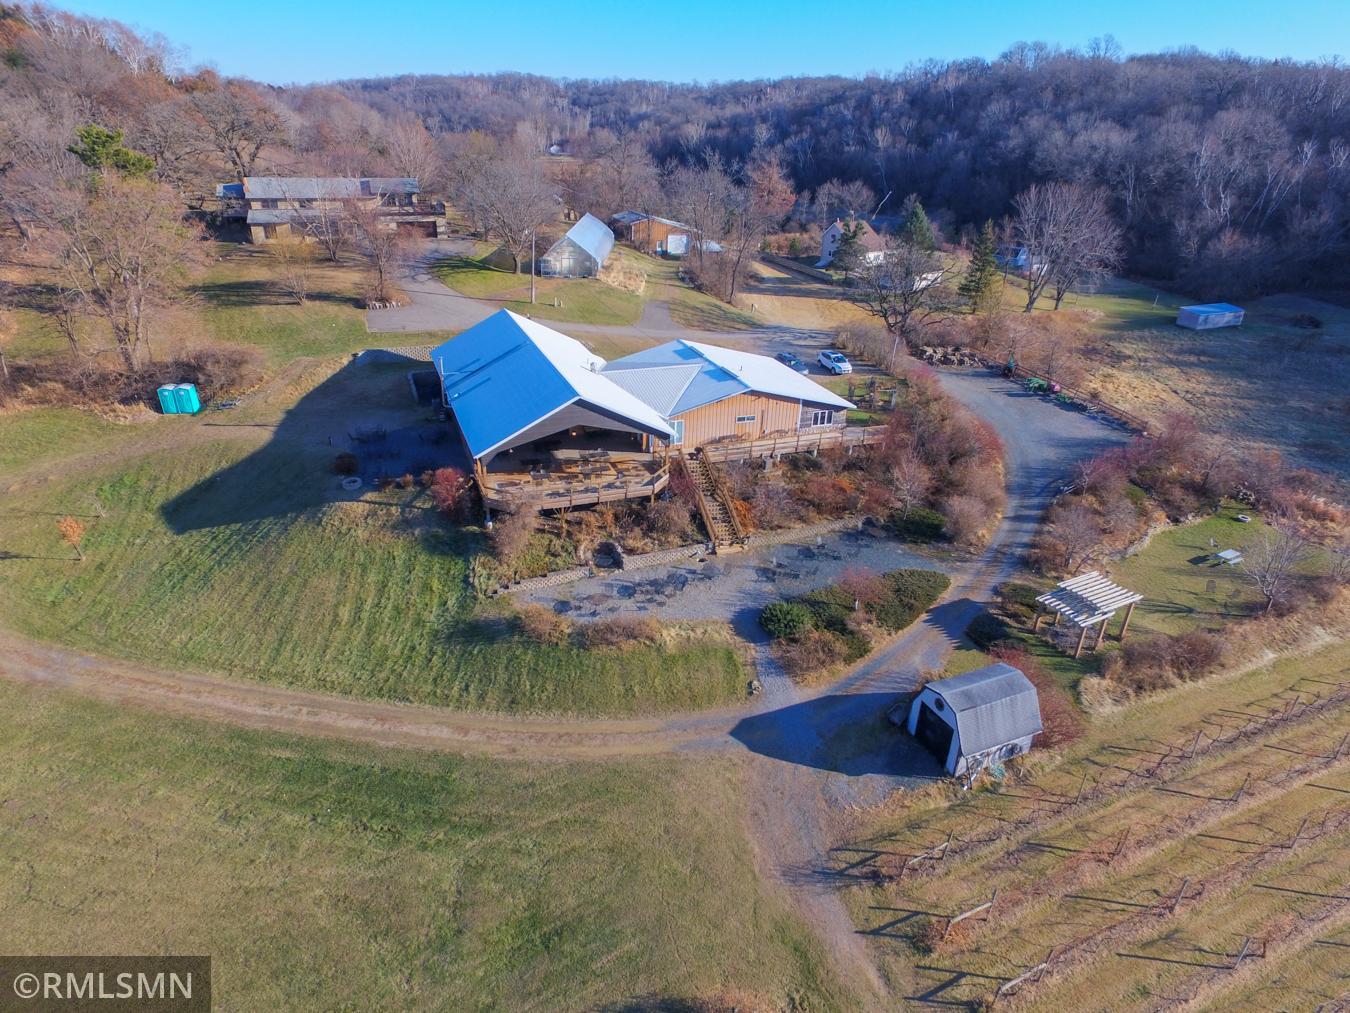 This 28.4 acre property has an established winery with event facilities